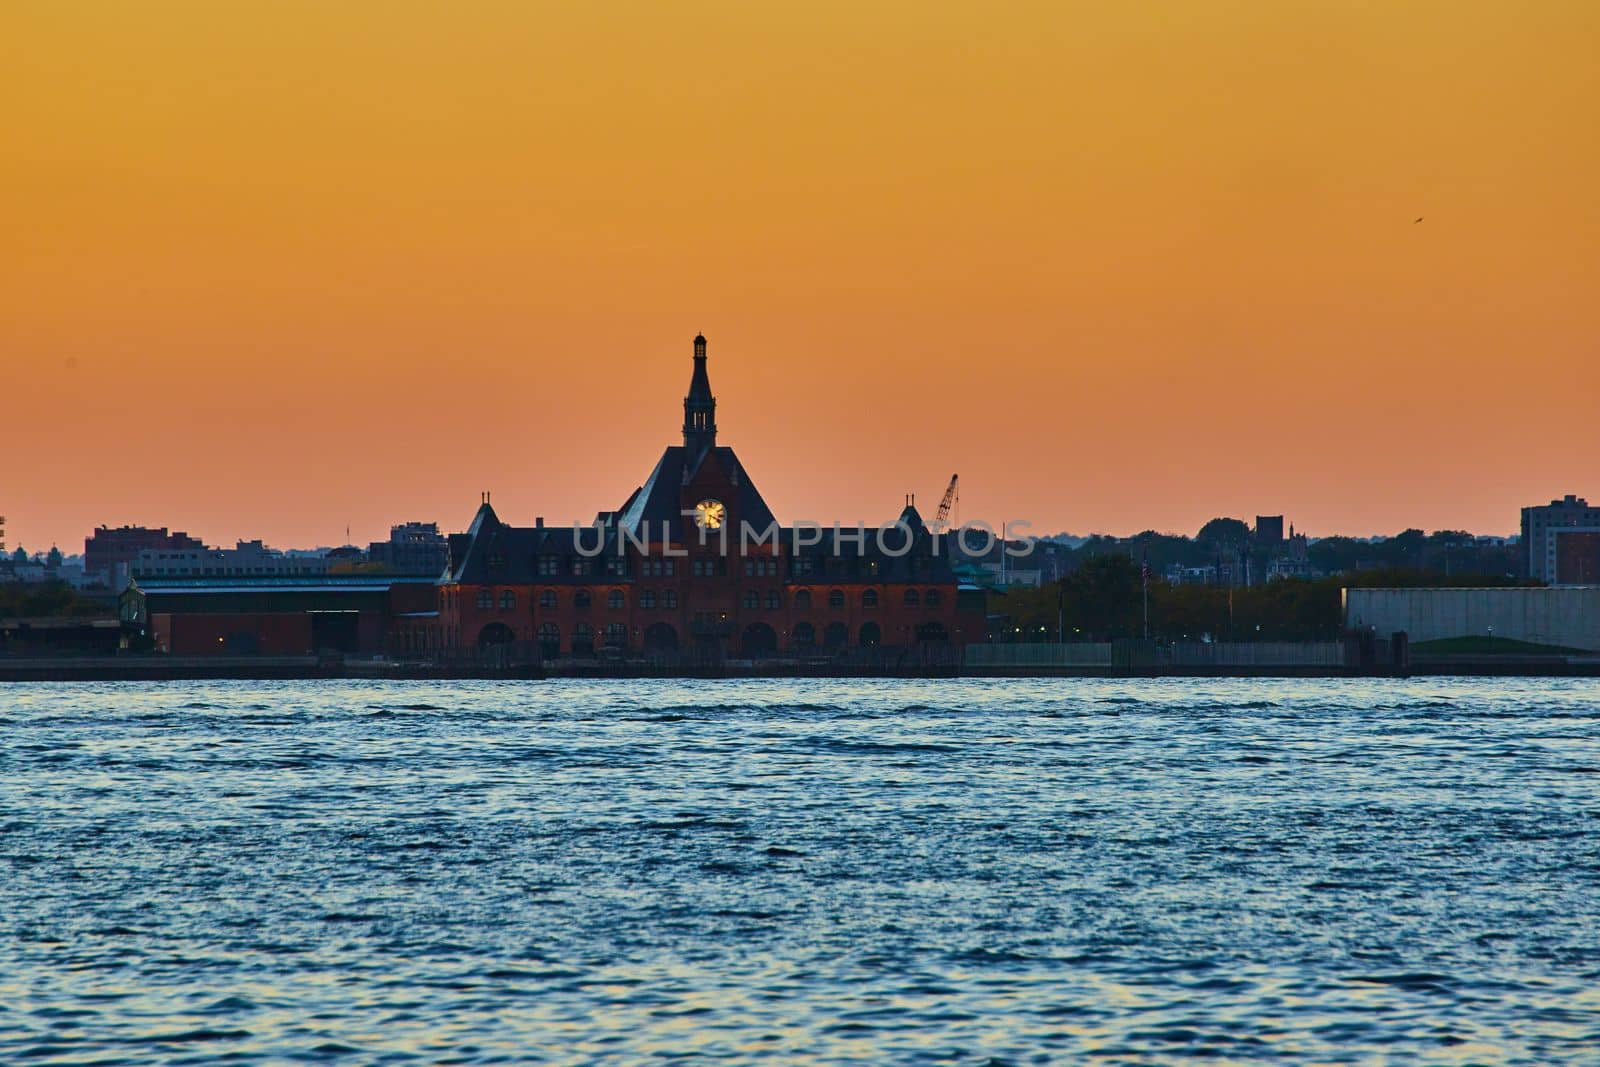 Image of New Jersey ferry station to Ellis Island from waters with glowing clock and orange dusk sky